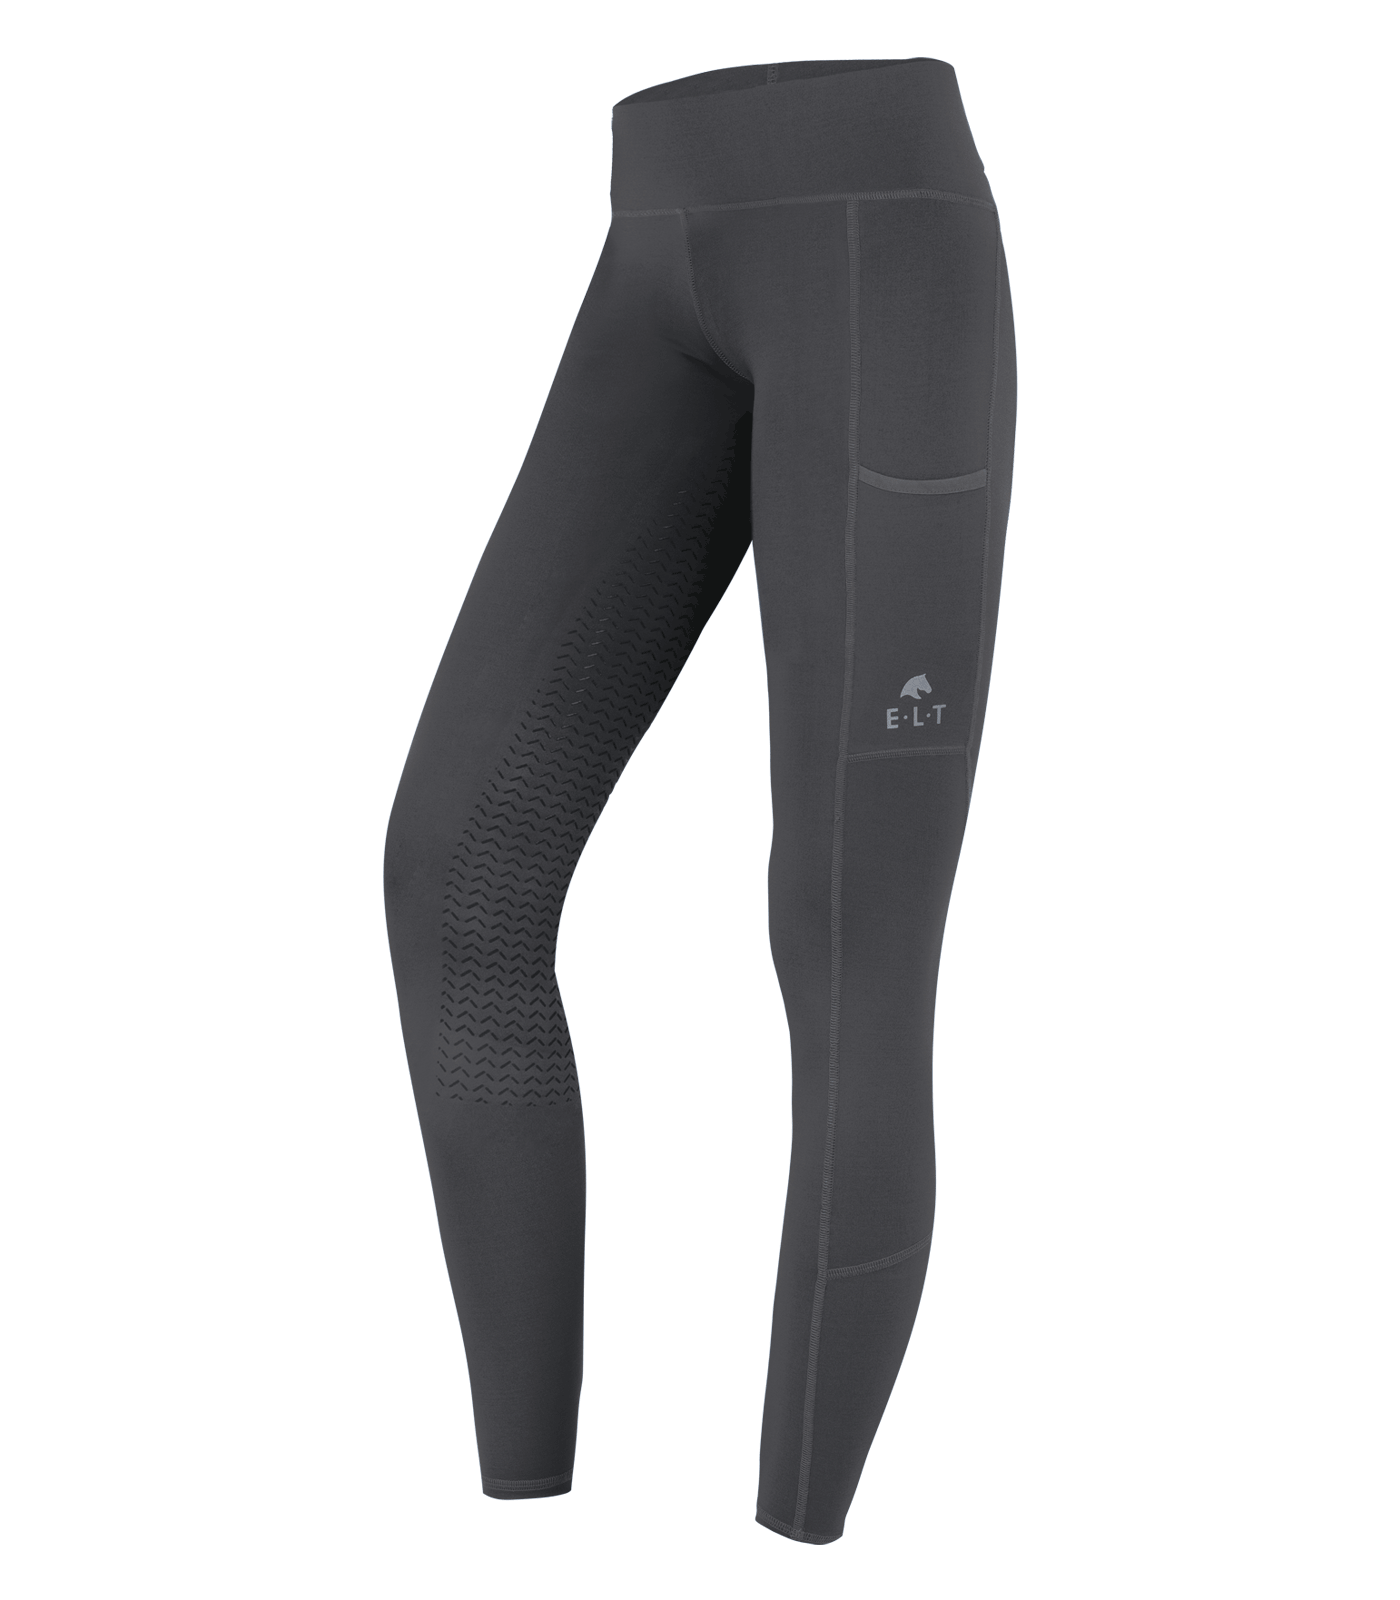 WINTER THERMAL Riding Leggings / Tights with pockets - BLACK